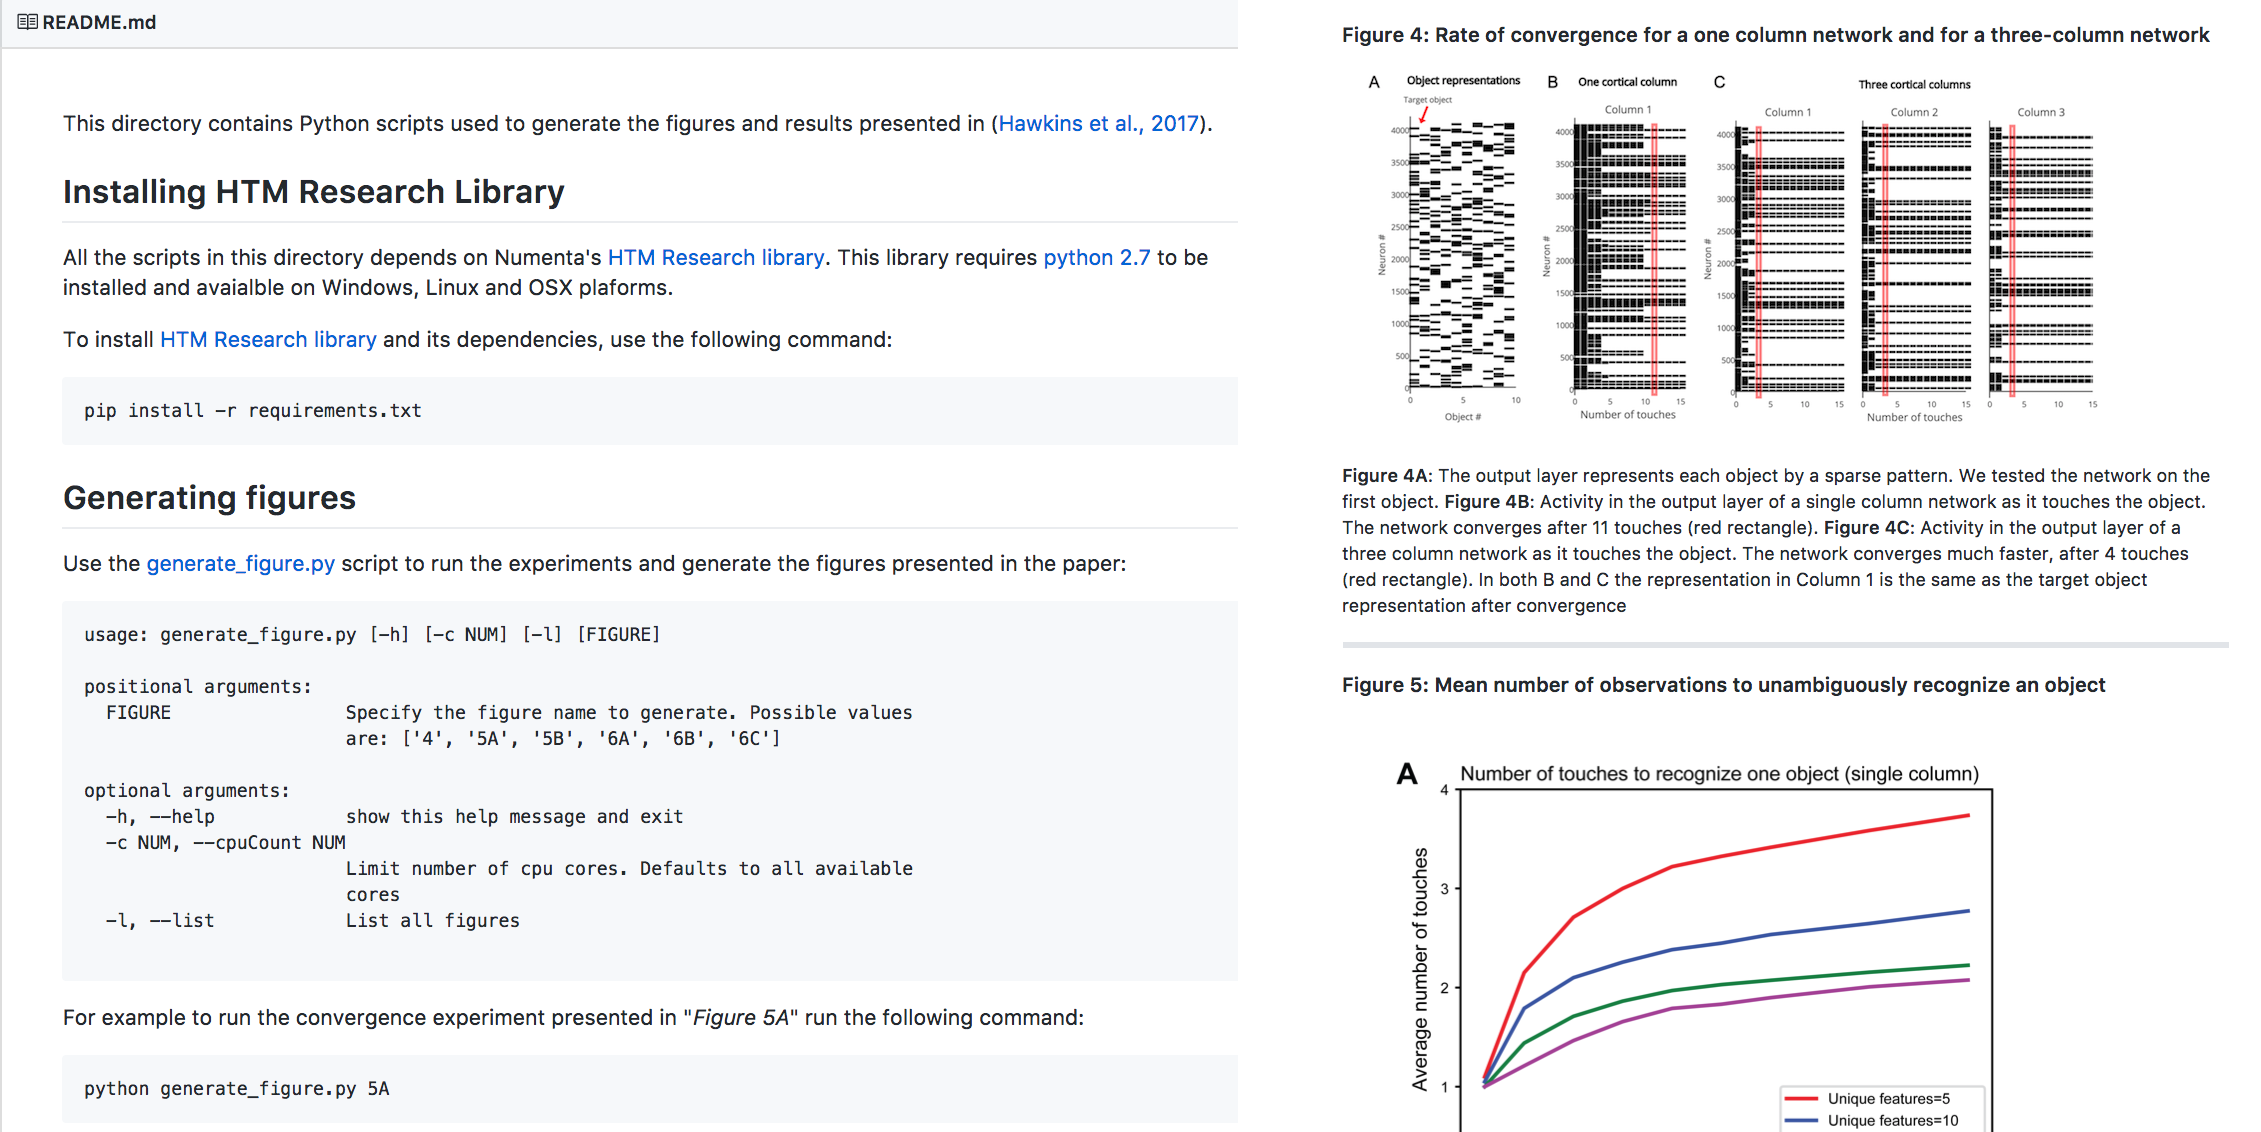 Replicating Scientific Results - Repository Readme Instructions and Figures